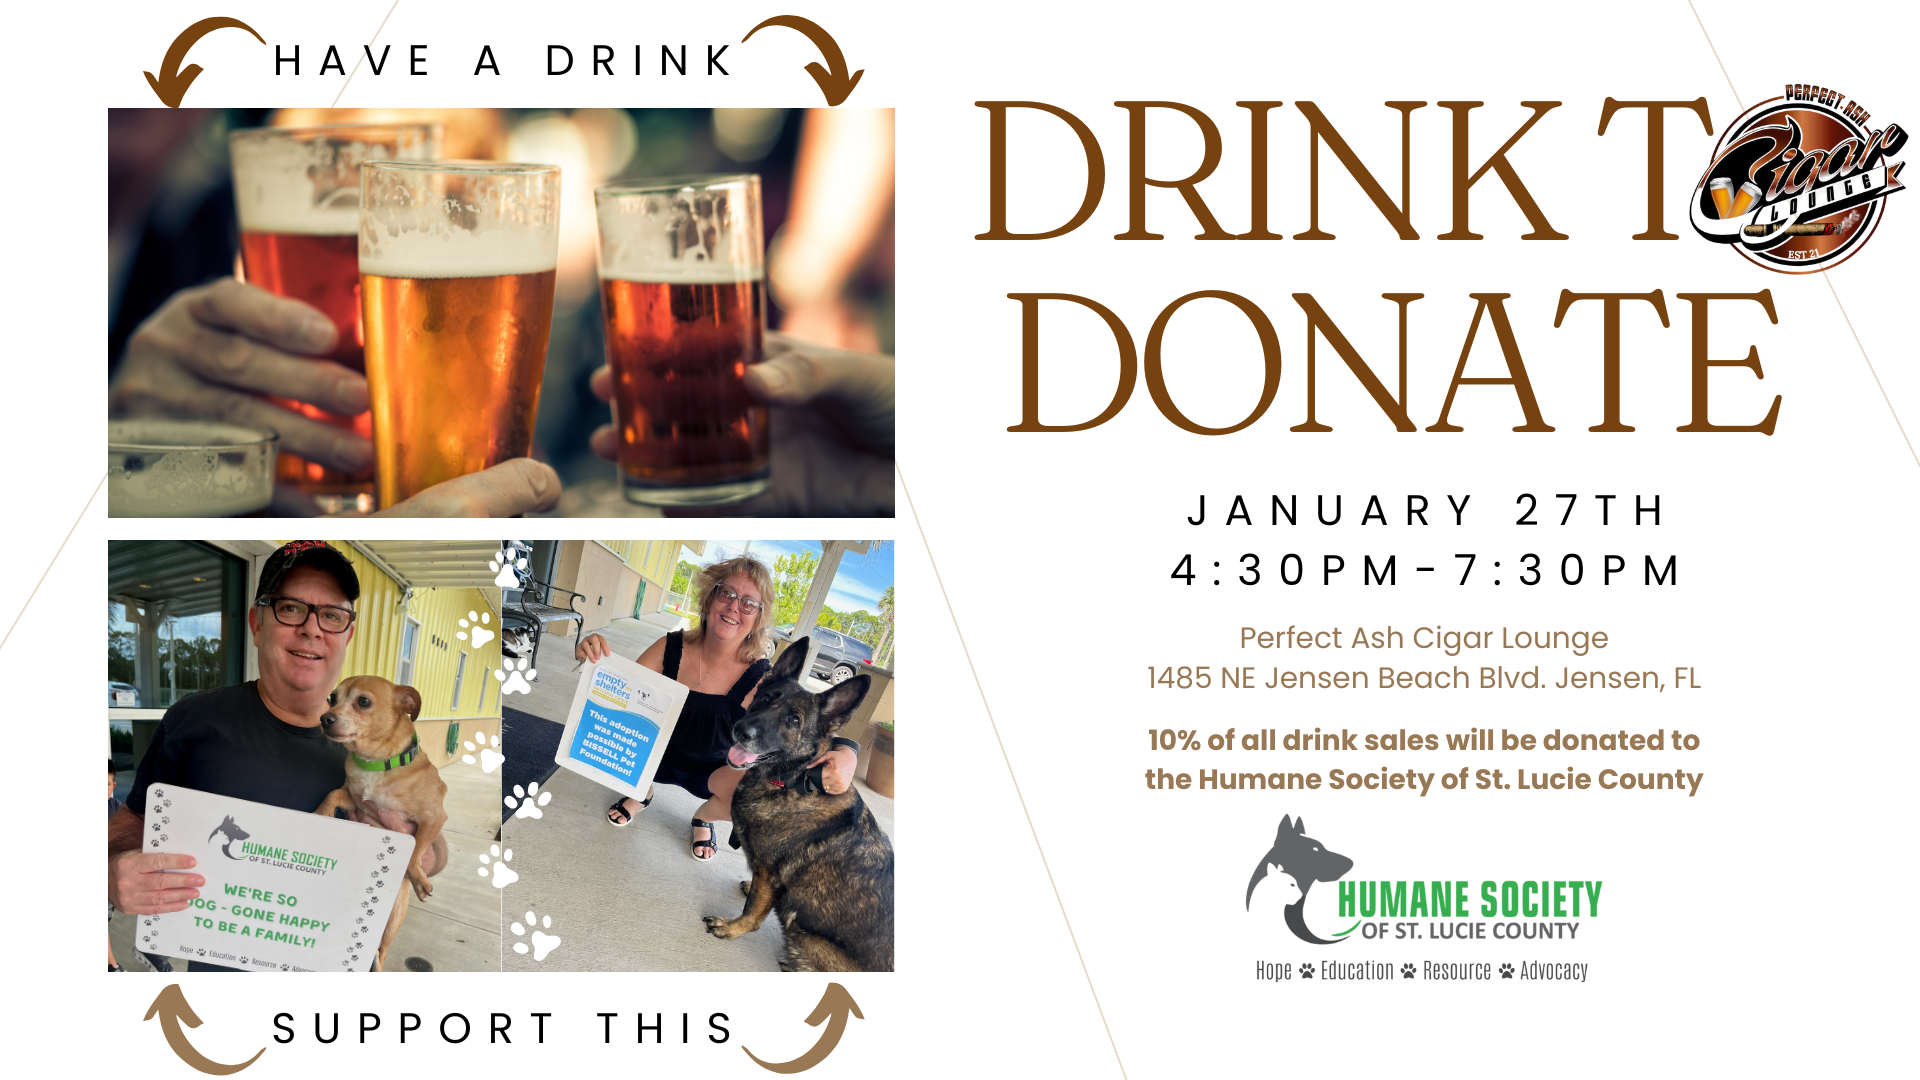 Drink to Donate at Perfect Ash Cigar Lounge to Support the Humane Society of St. Lucie County